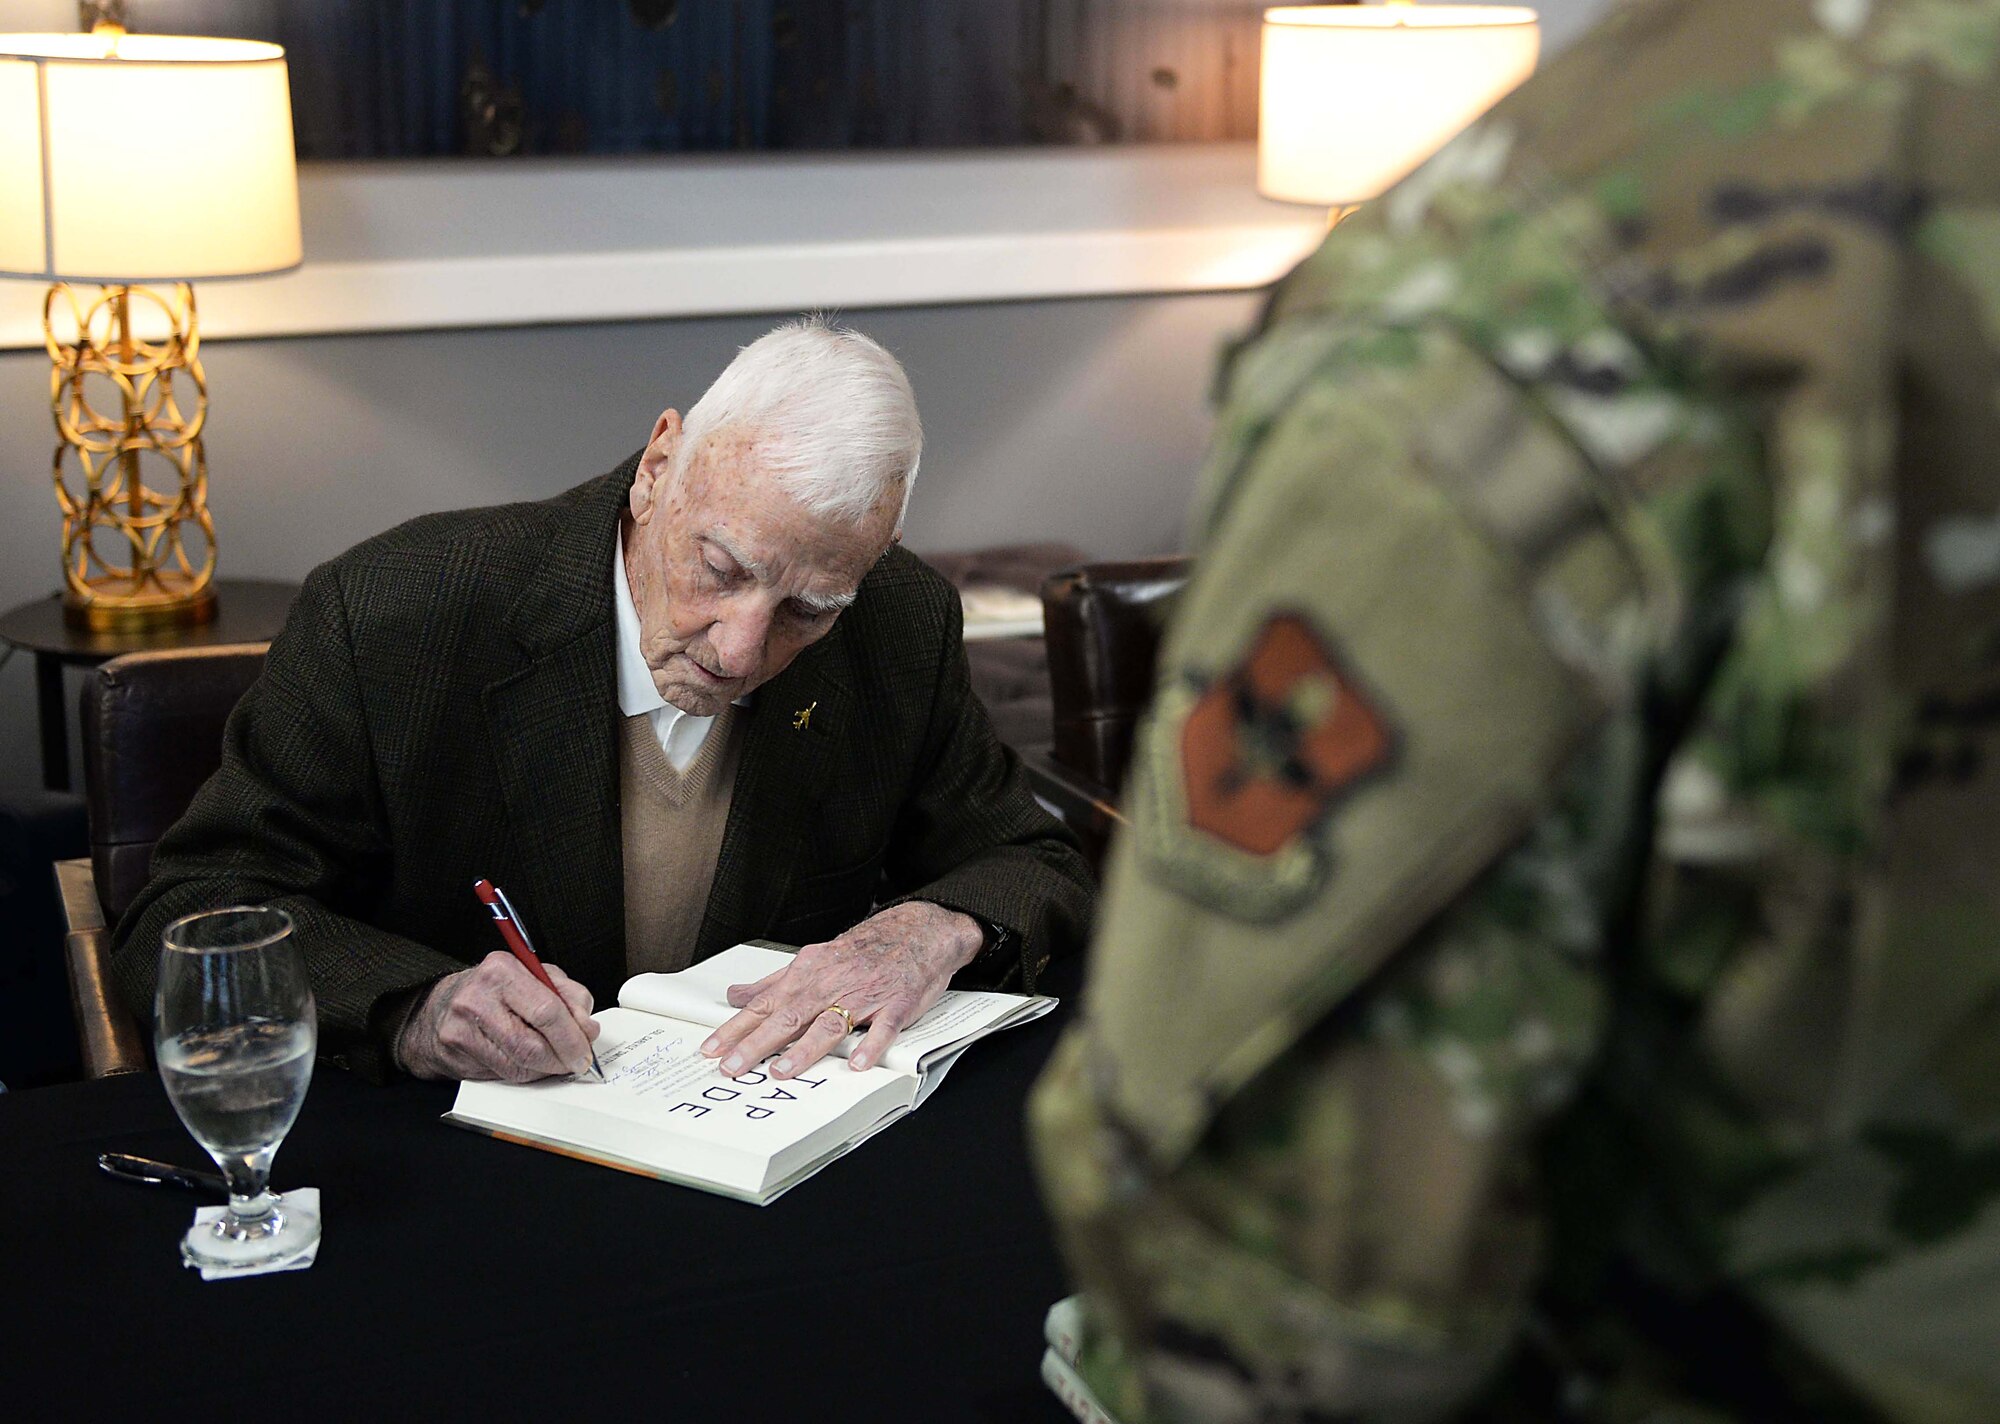 Retired Air Force Col. Carlyle “Smitty” Harris signs a book for an Airman during a book signing, Jan. 10, 2020 at the Columbus Event Center on Columbus Air Force Base, Miss. More than 130 books were signed by Smitty and his wife Louise for members of Team BLAZE. (U.S. Air Force photo by Airman 1st Class Hannah Bean)